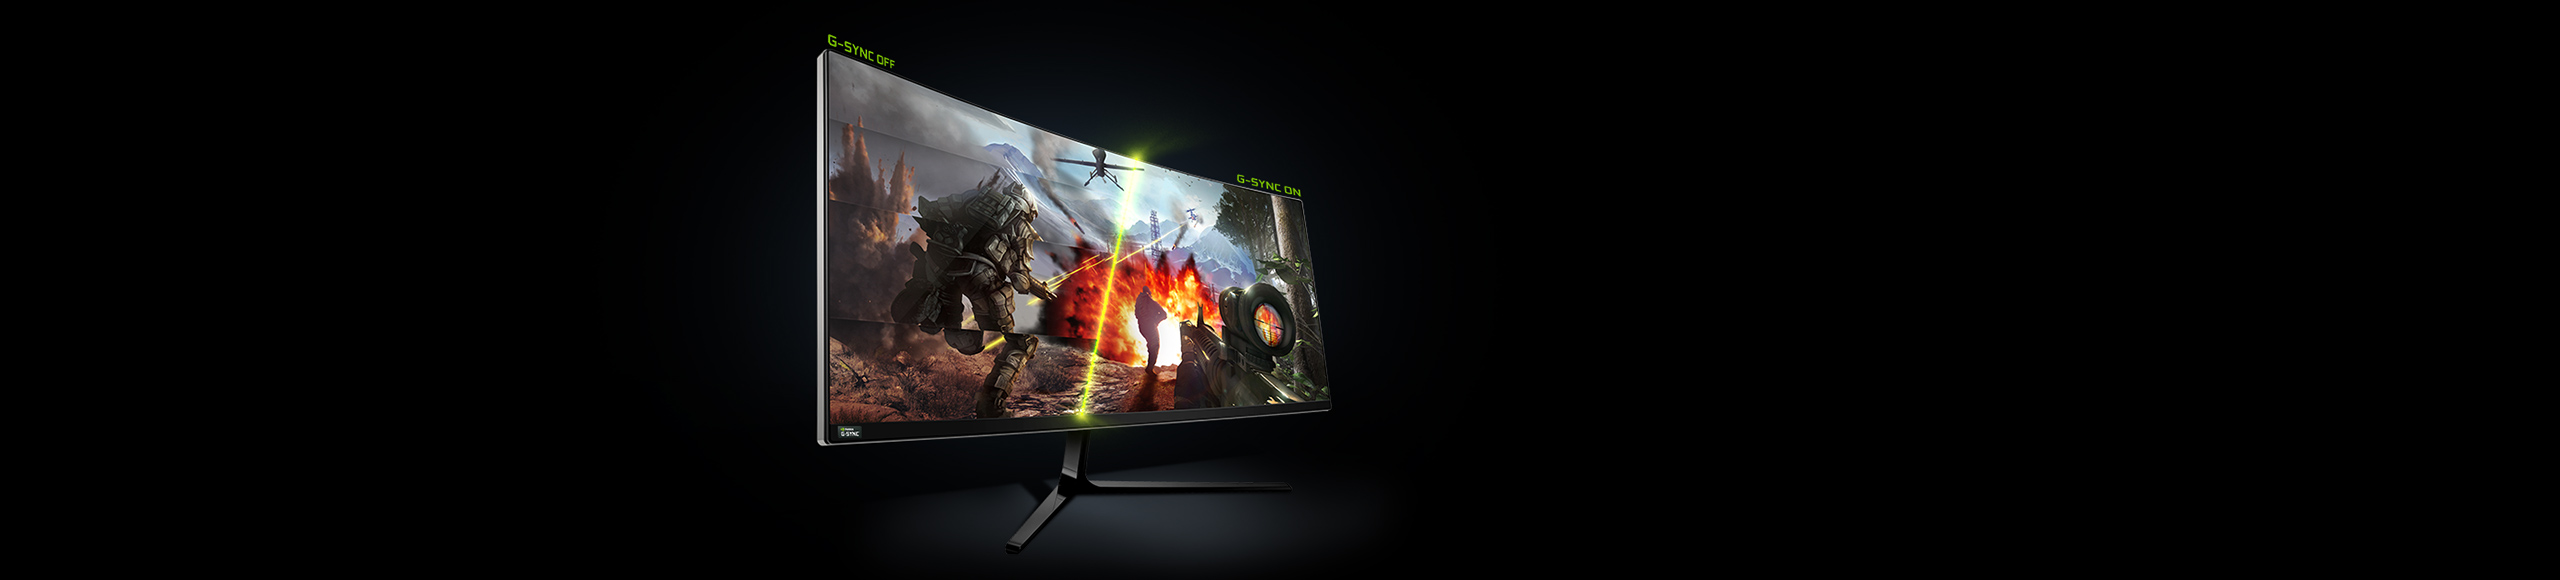 27 UltraGear™ QHD 1ms 165Hz Monitor with NVIDIA® G-SYNC® Compatible